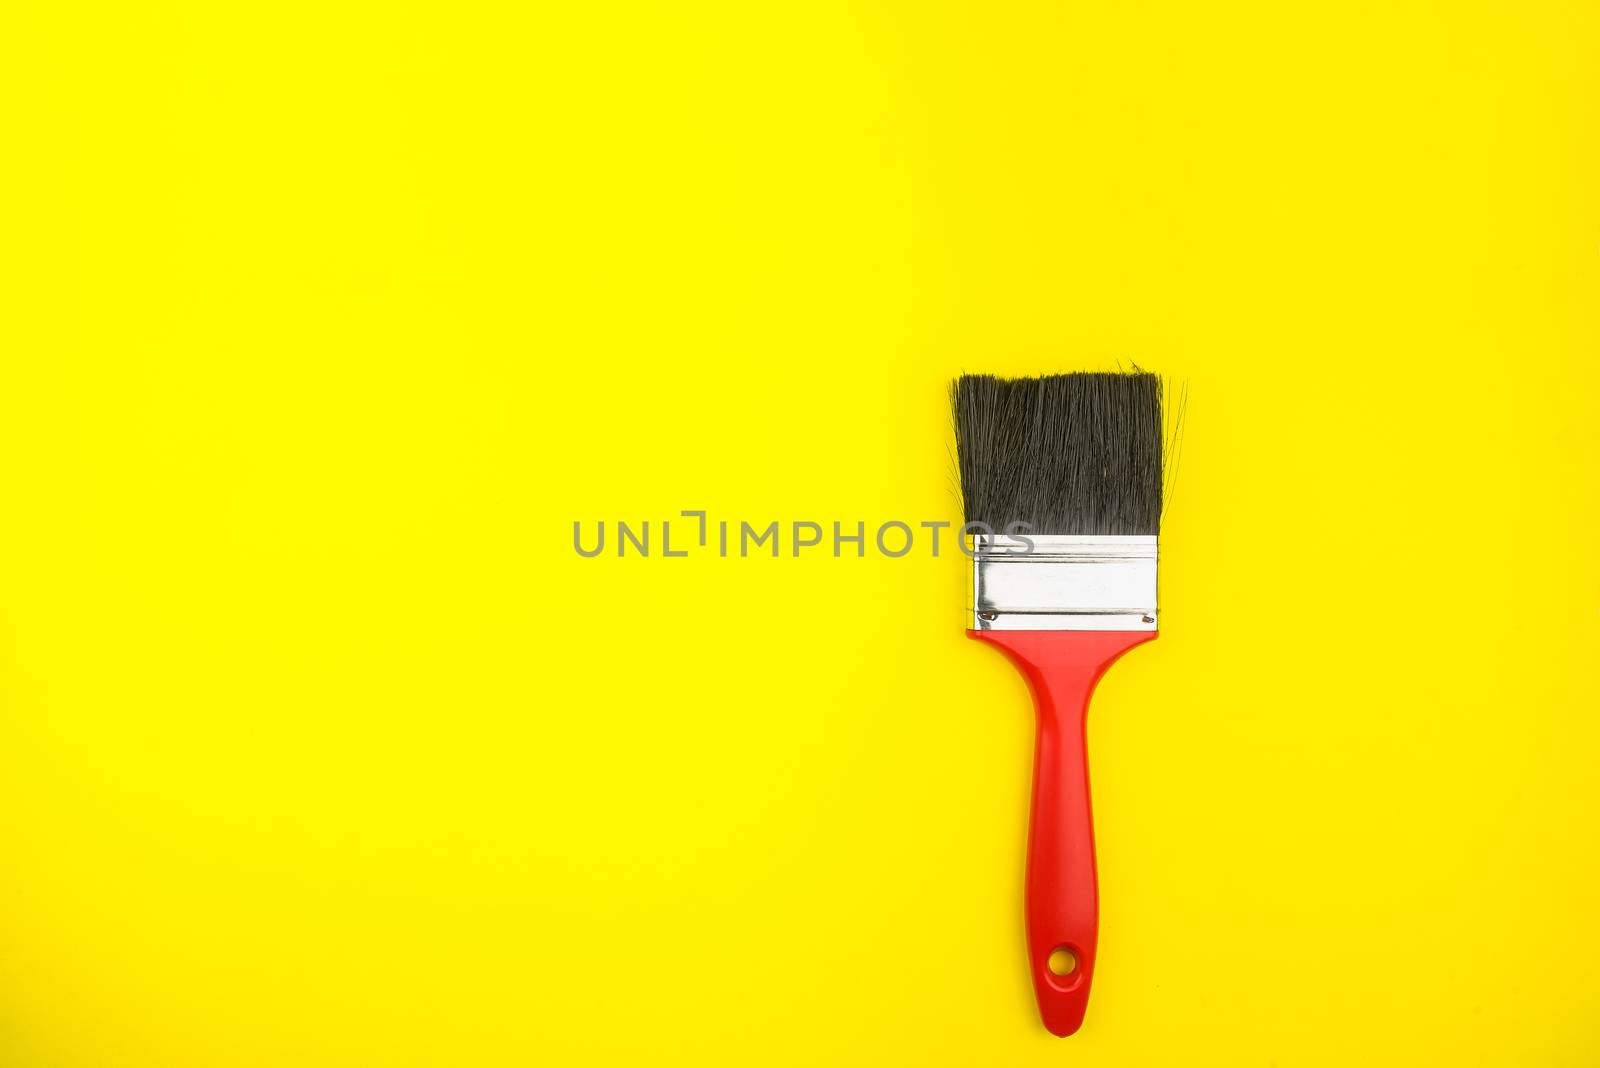 Top view of paint brushes on yellow background with copy space, minimalistic style